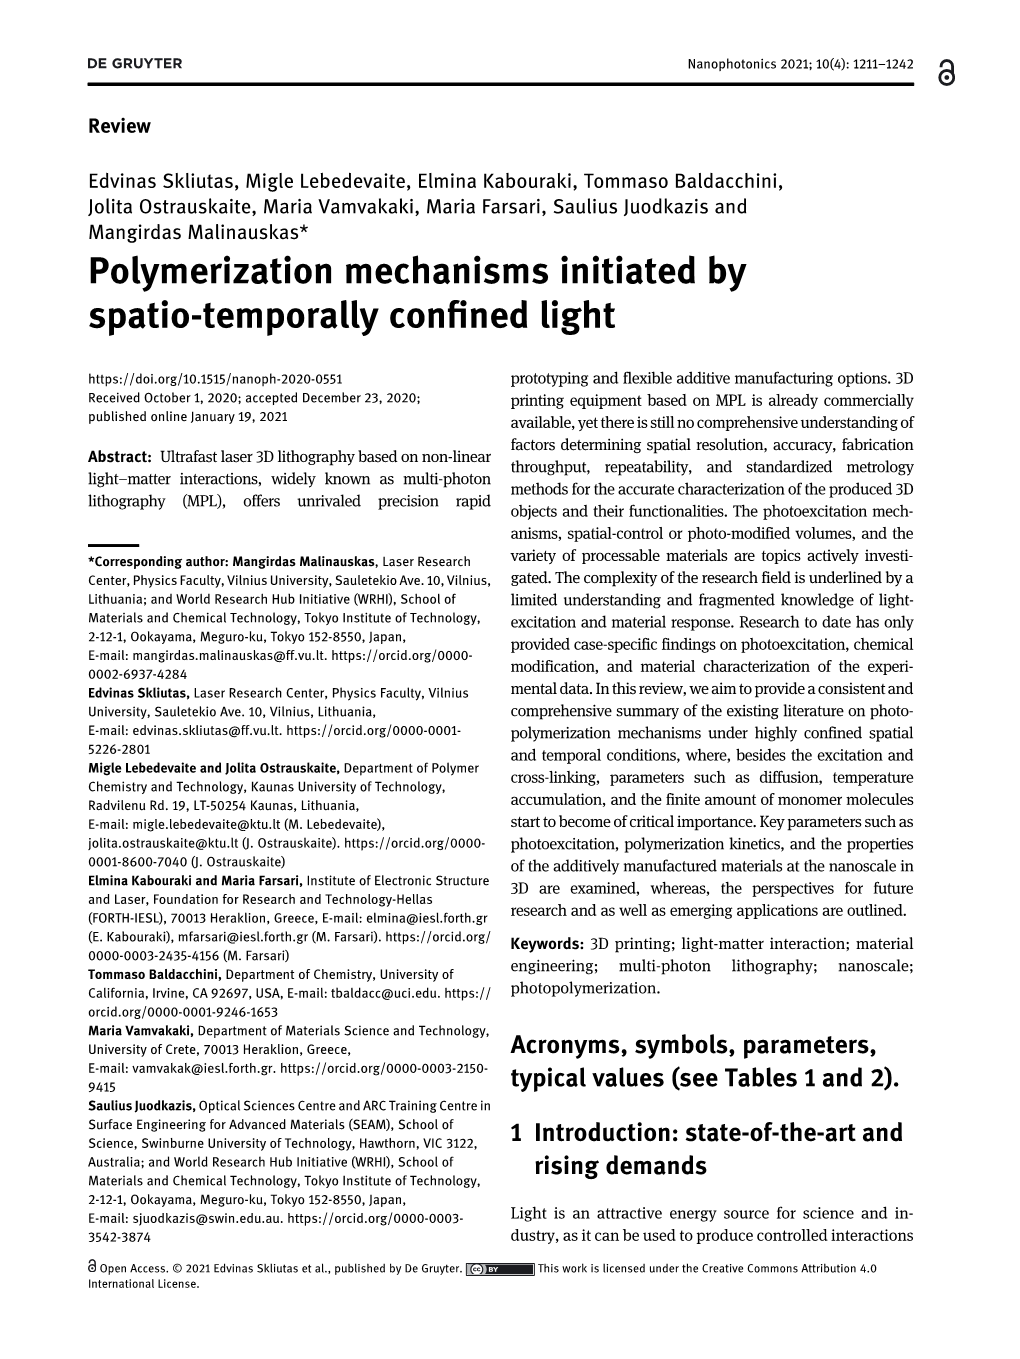 Polymerization Mechanisms Initiated by Spatio-Temporally Confined Light